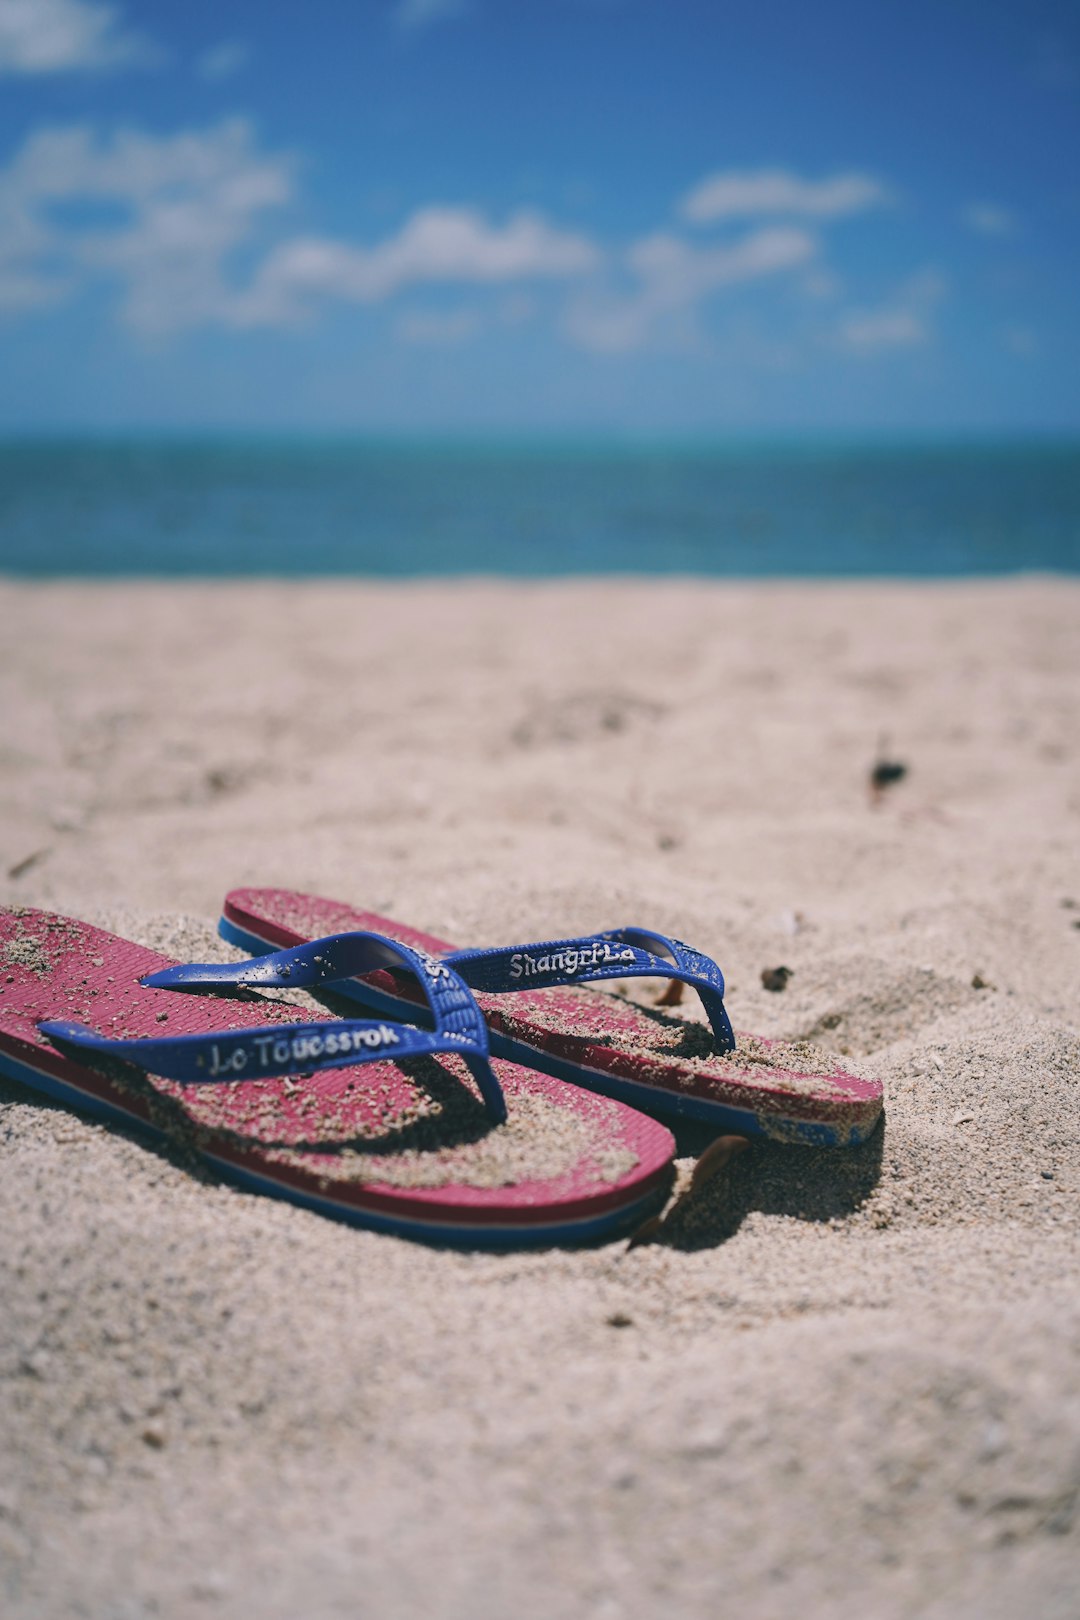 red and blue flip flops on white sand during daytime